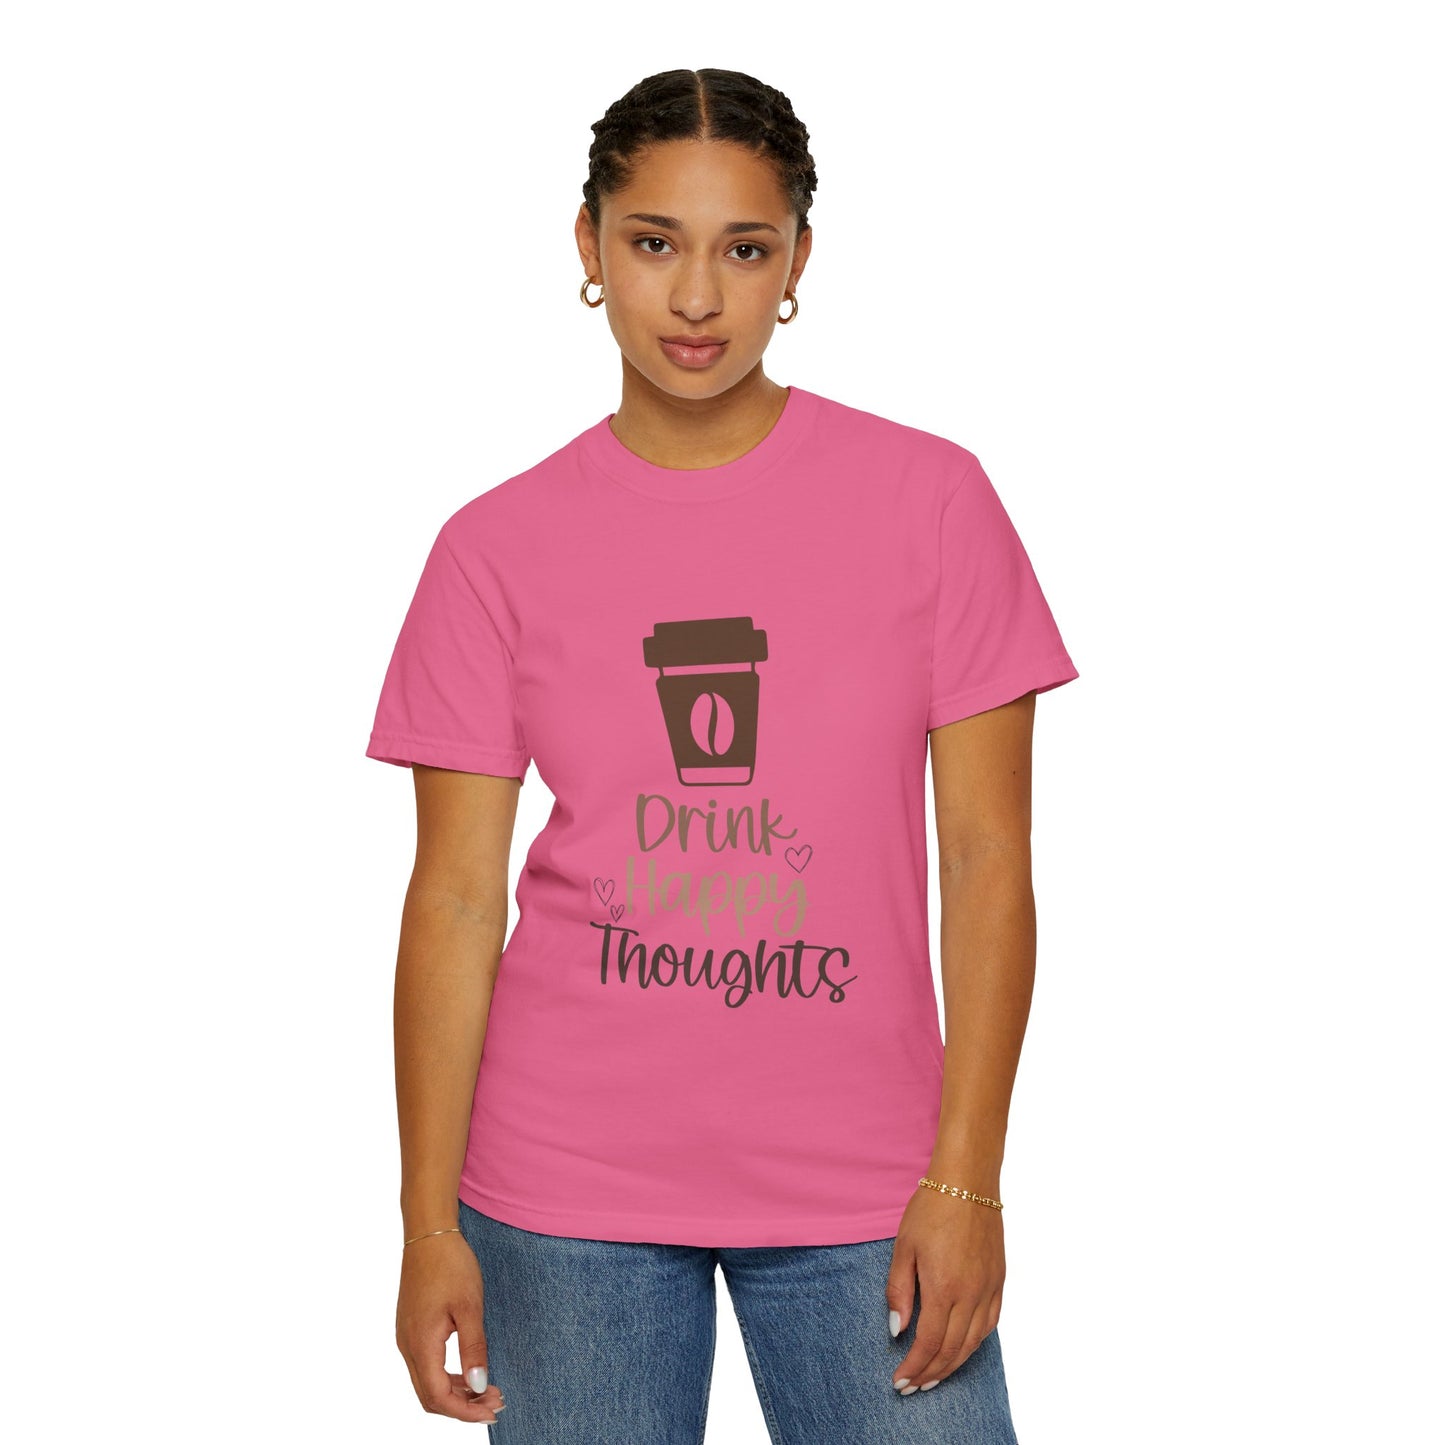 Drink happy Thoughts Garment-Dyed T-shirt